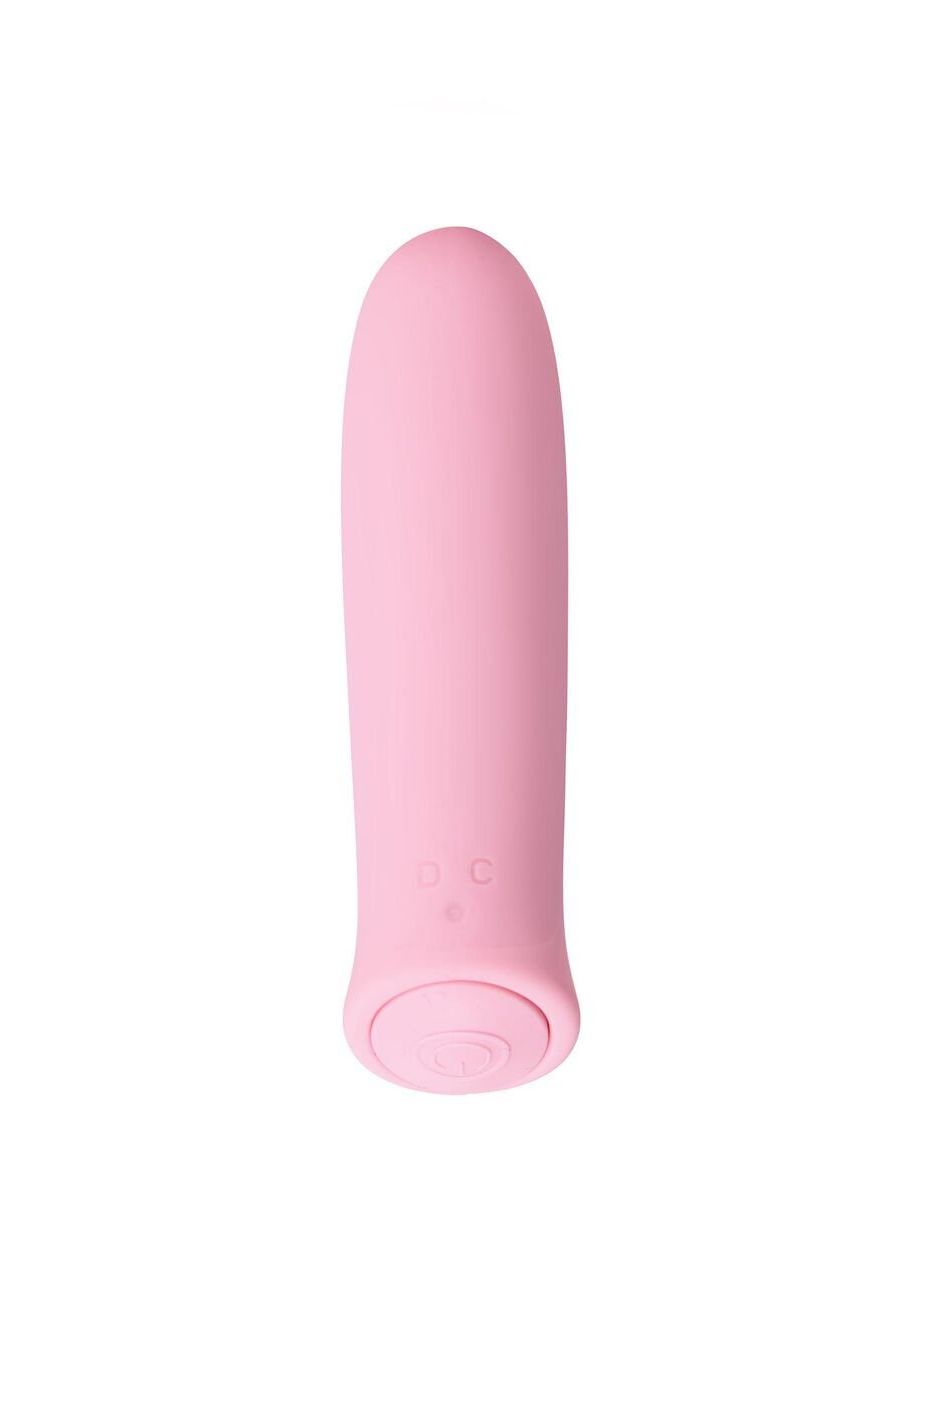 Silicone Rechargeable Power Bullet